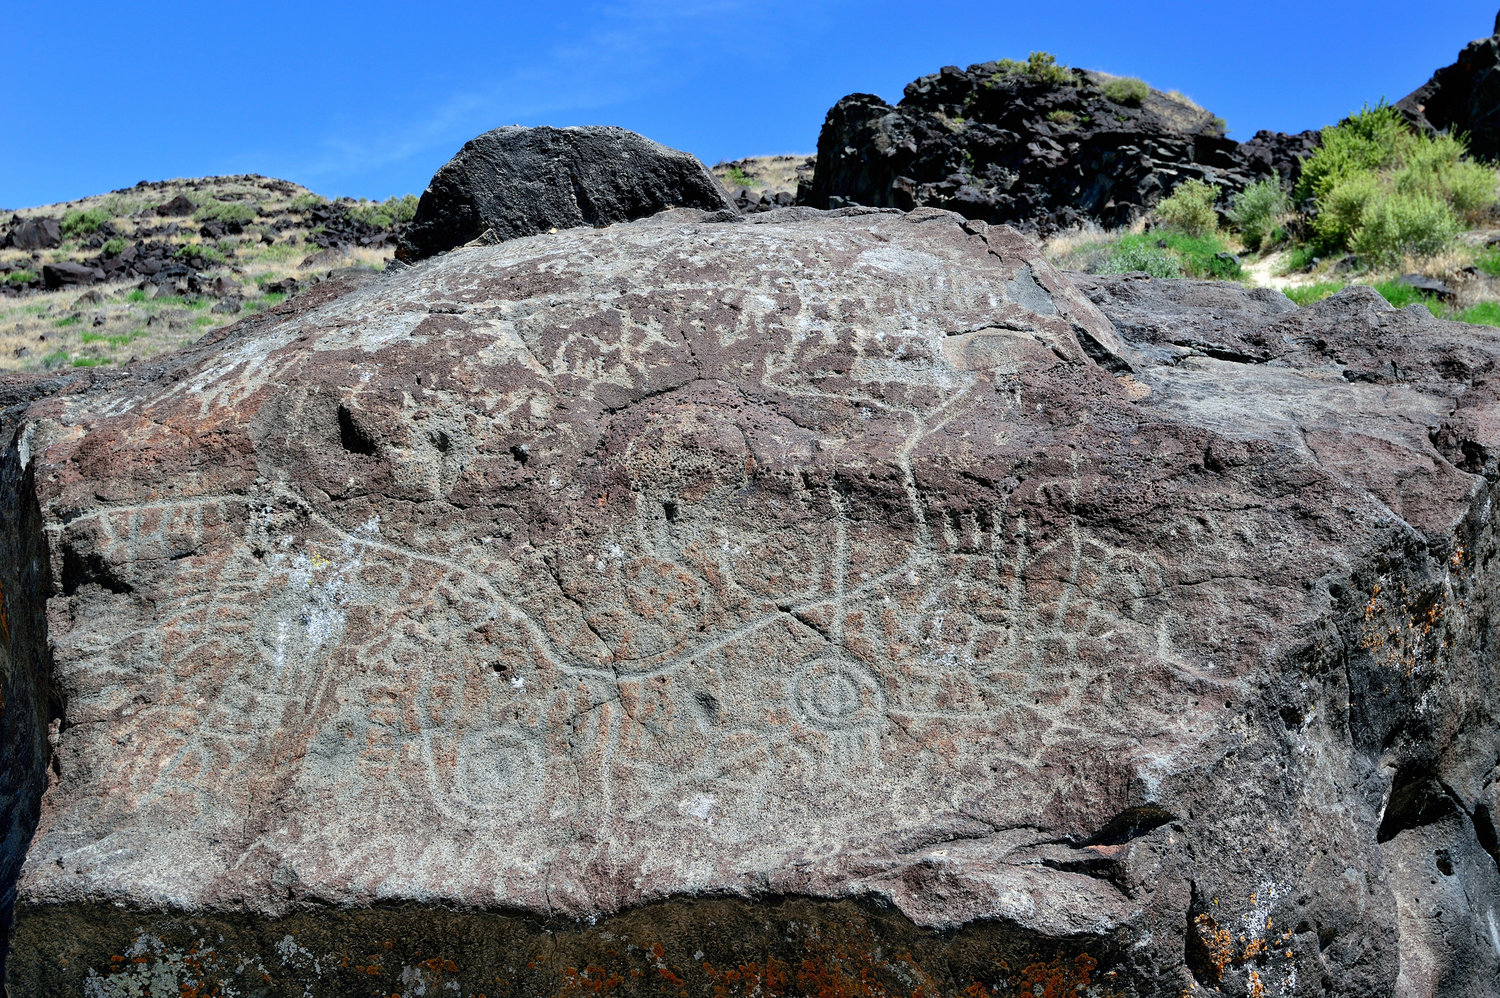 Map Rock, of important historic significance, a massive basalt rock covered in petroglyphs attributed to the Northern Shoshone Native Americans before contact with the Westward expansion of settlers in Idaho. Named by Robert Limbert in the early 1920s, Limbert believed that the rock, located near Melba, Idaho, depicts a map of the Snake River valley. (Dreamstime/TNS)